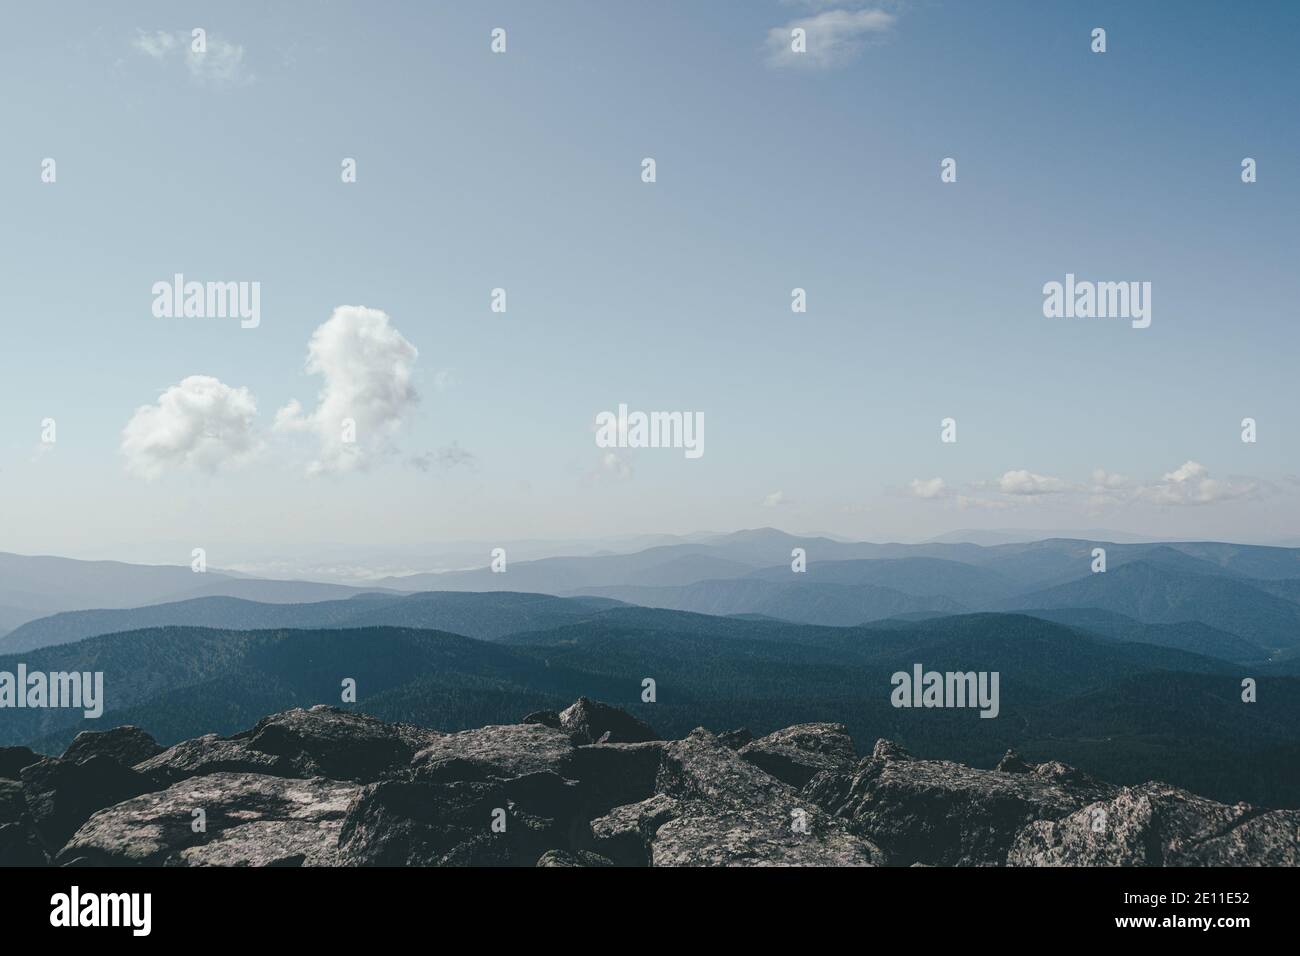 Thick clouds over mountain range, hills in blue haze Stock Photo